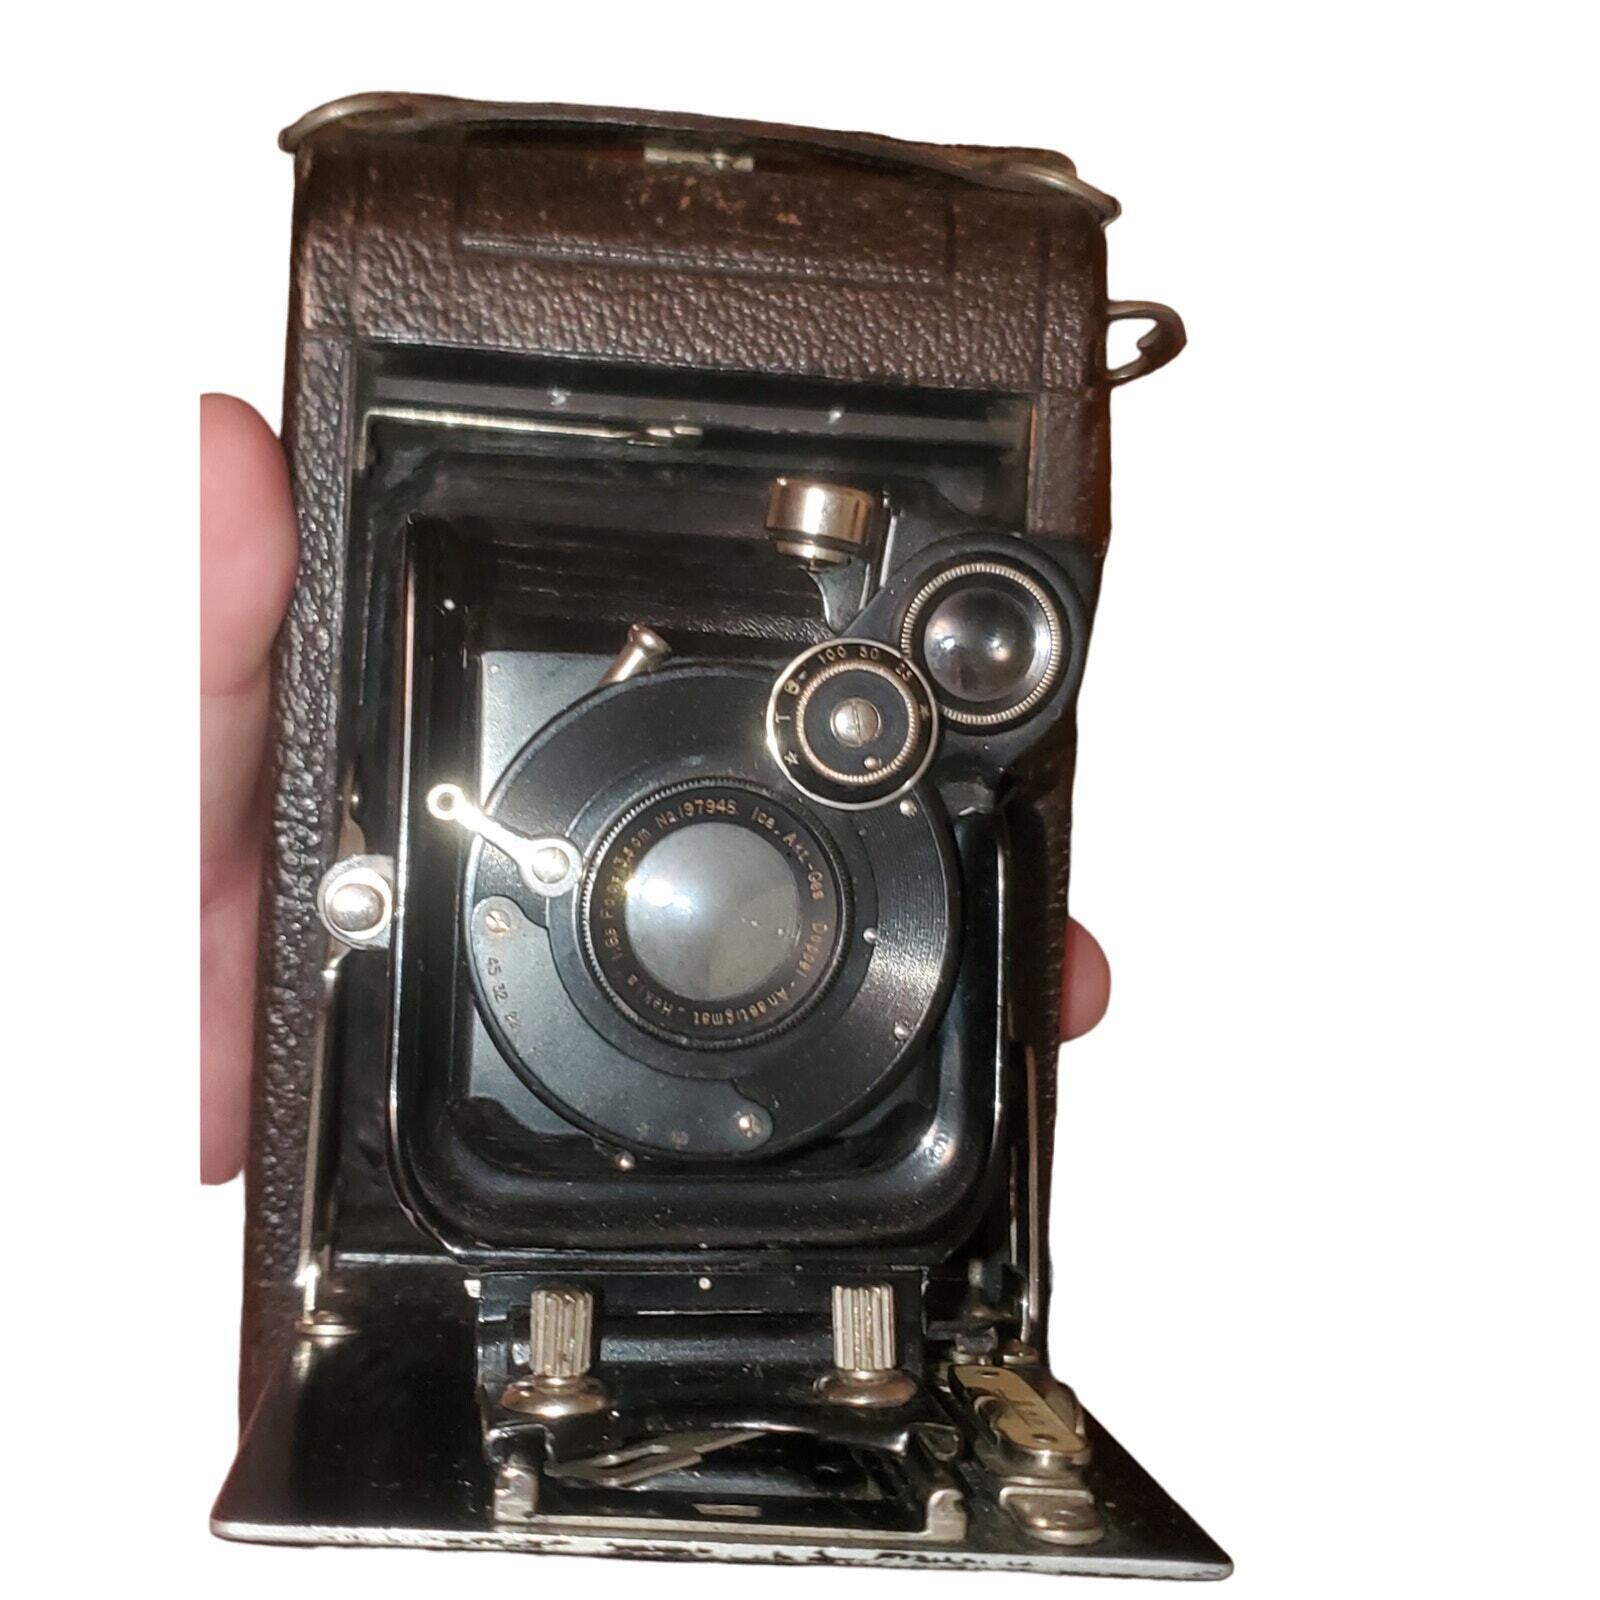 Vintage folding camera from the early 1900s Doppel Anistigmat lens and film